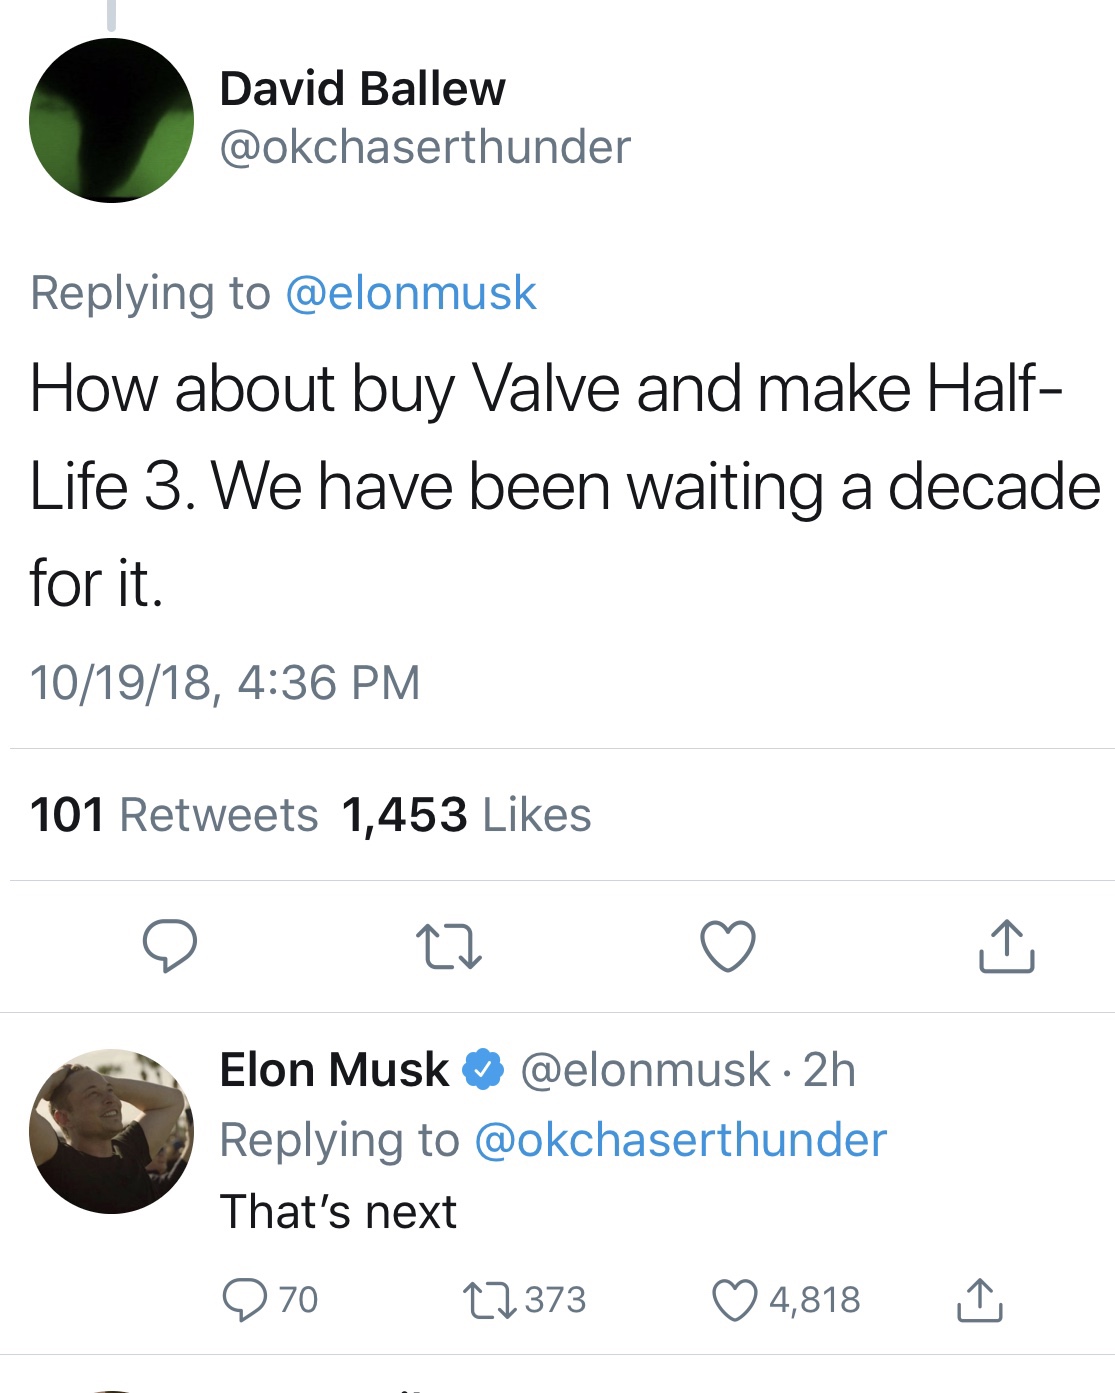 number - David Ballew How about buy Valve and make Half Life 3. We have been waiting a decade for it. 101918, 101 1,453 o o o Elon Musk 2h That's next Q70 27373 4,818